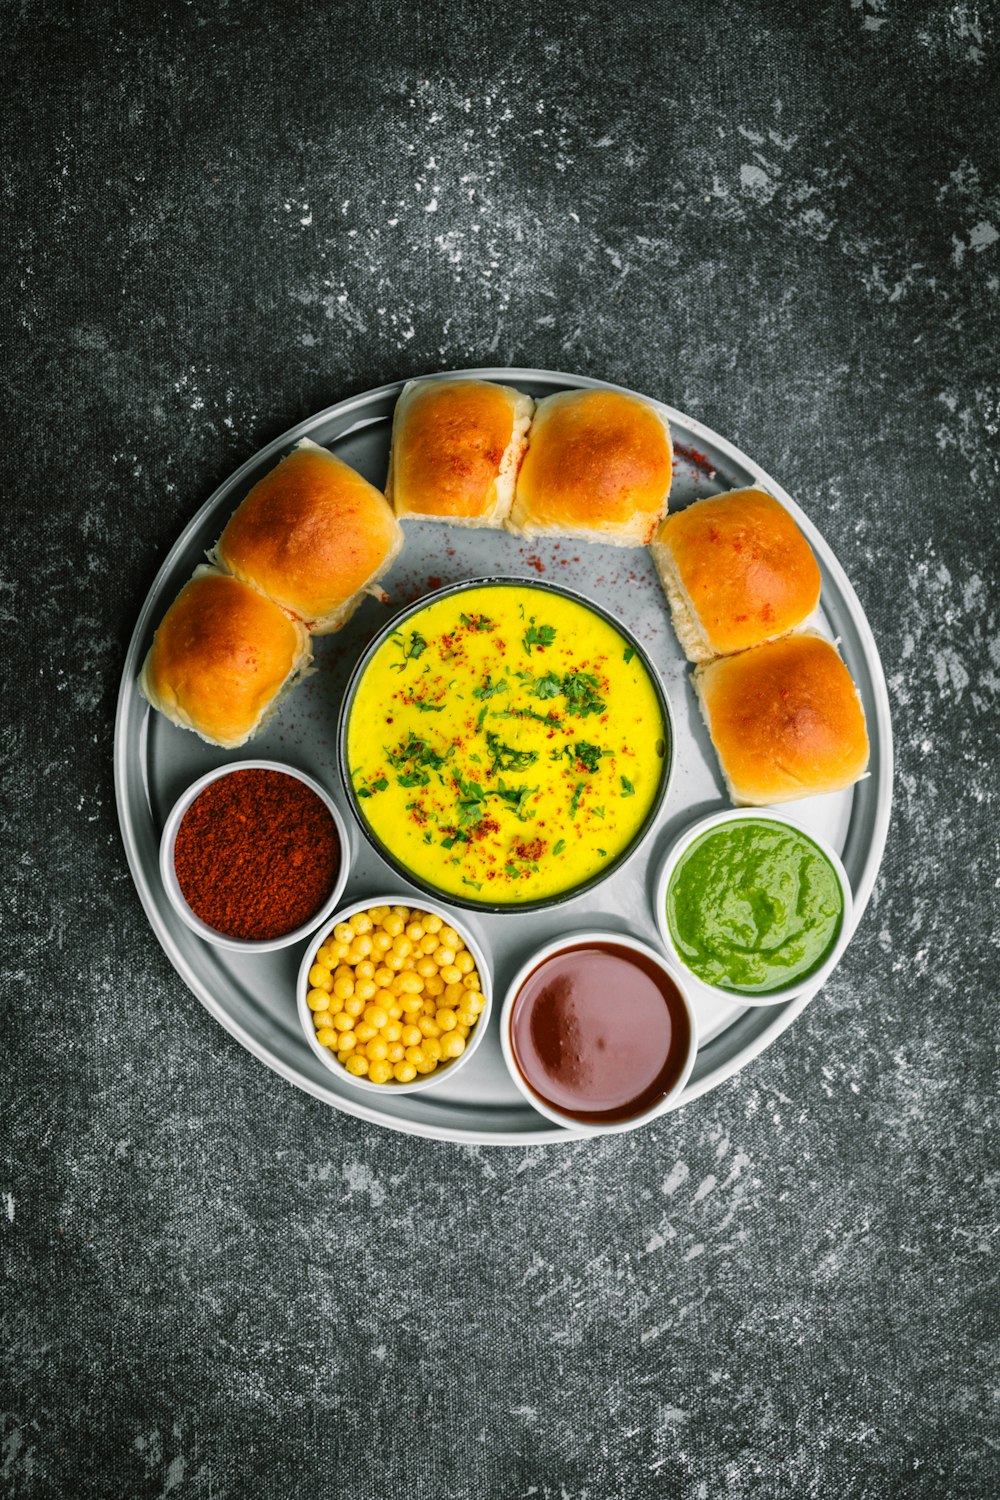 a plate of food that includes bread, dips, and sauces